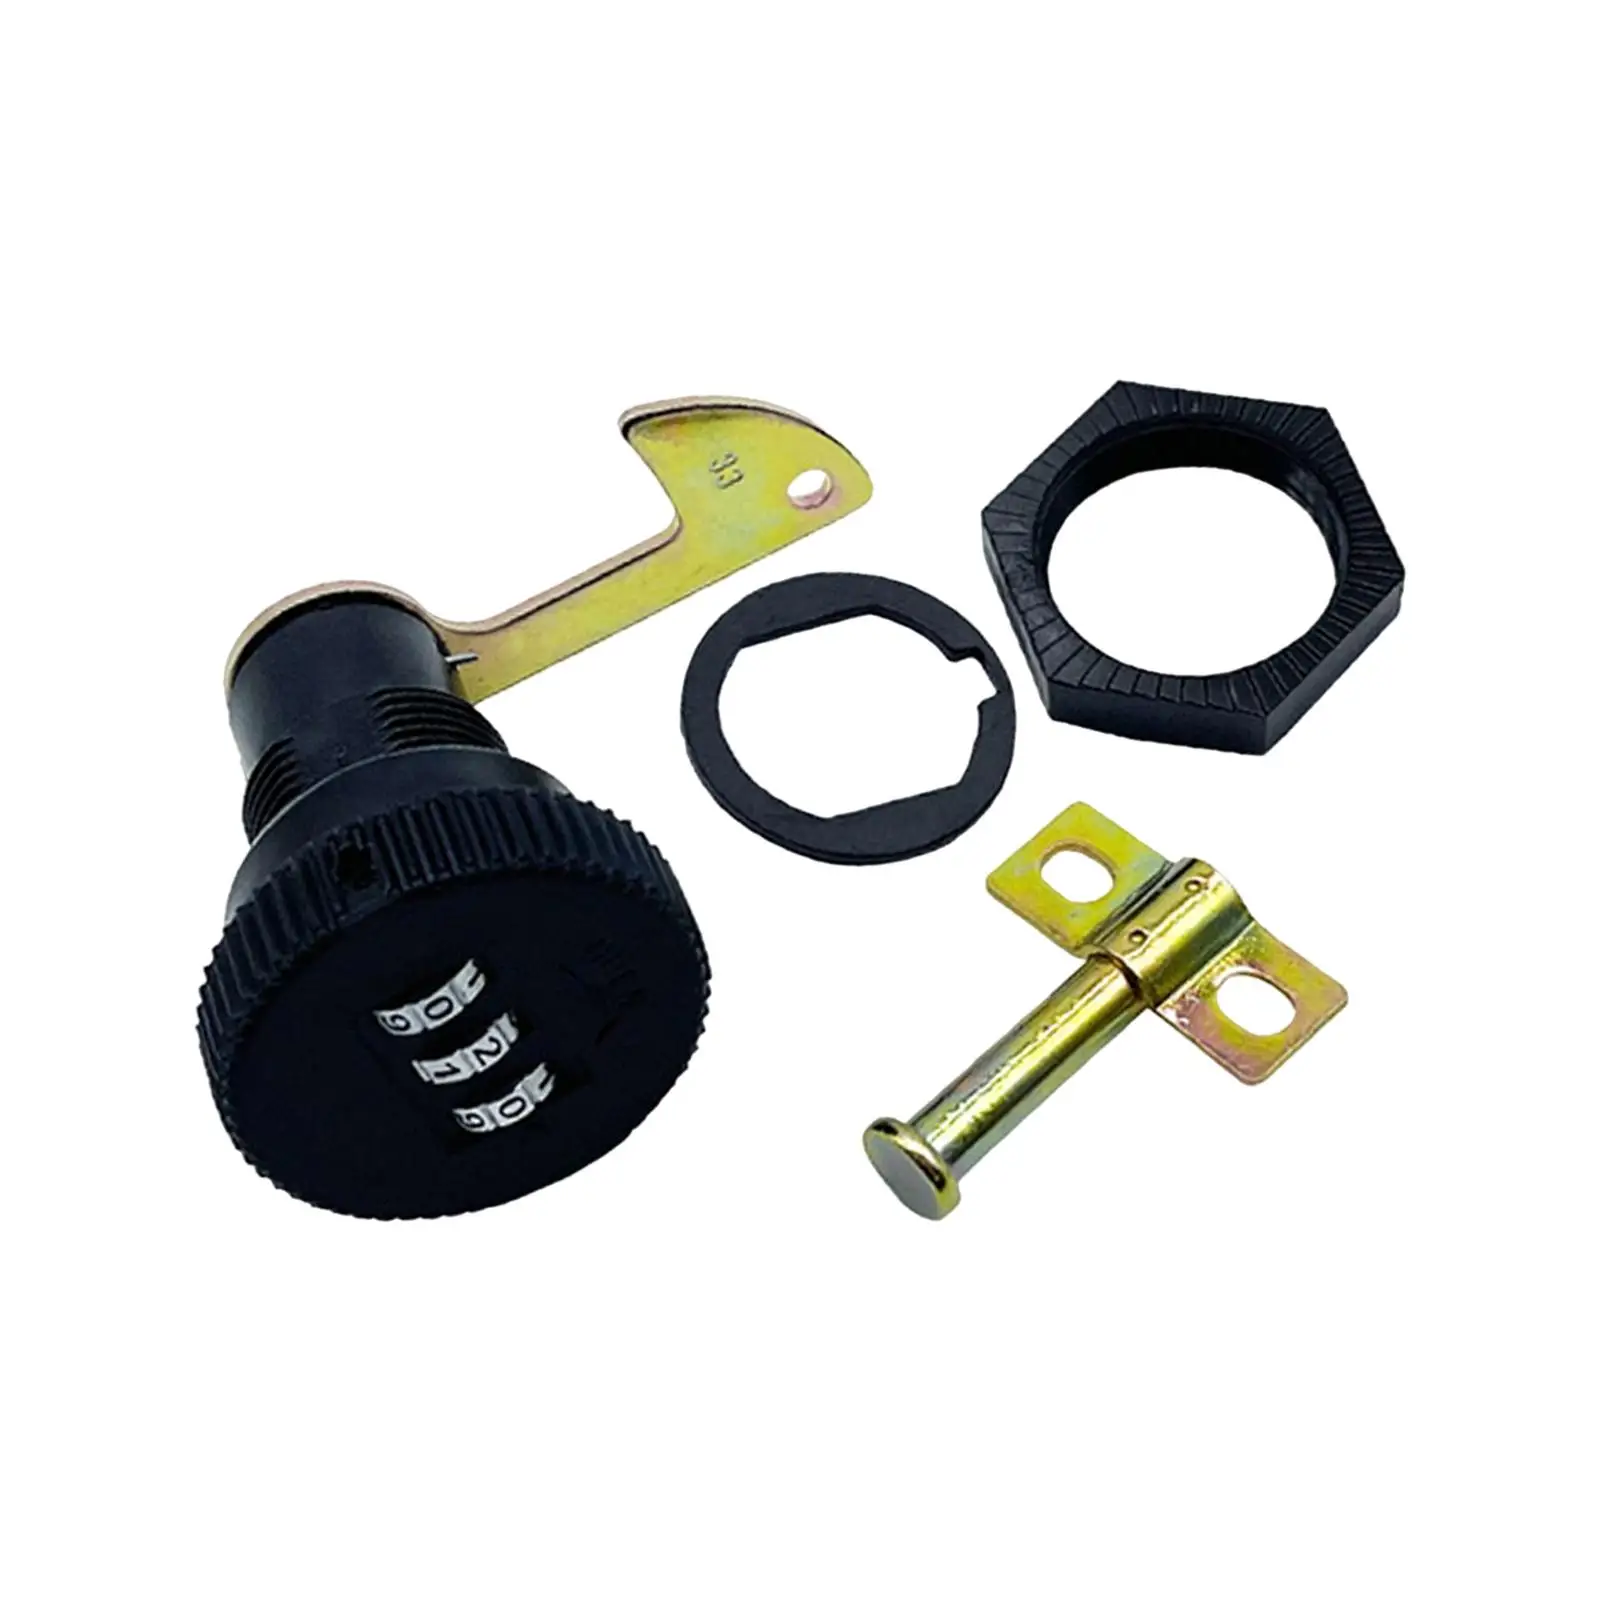 Combination Lock for Motorbike Rear Trunk Easily Install Accessory Replaces